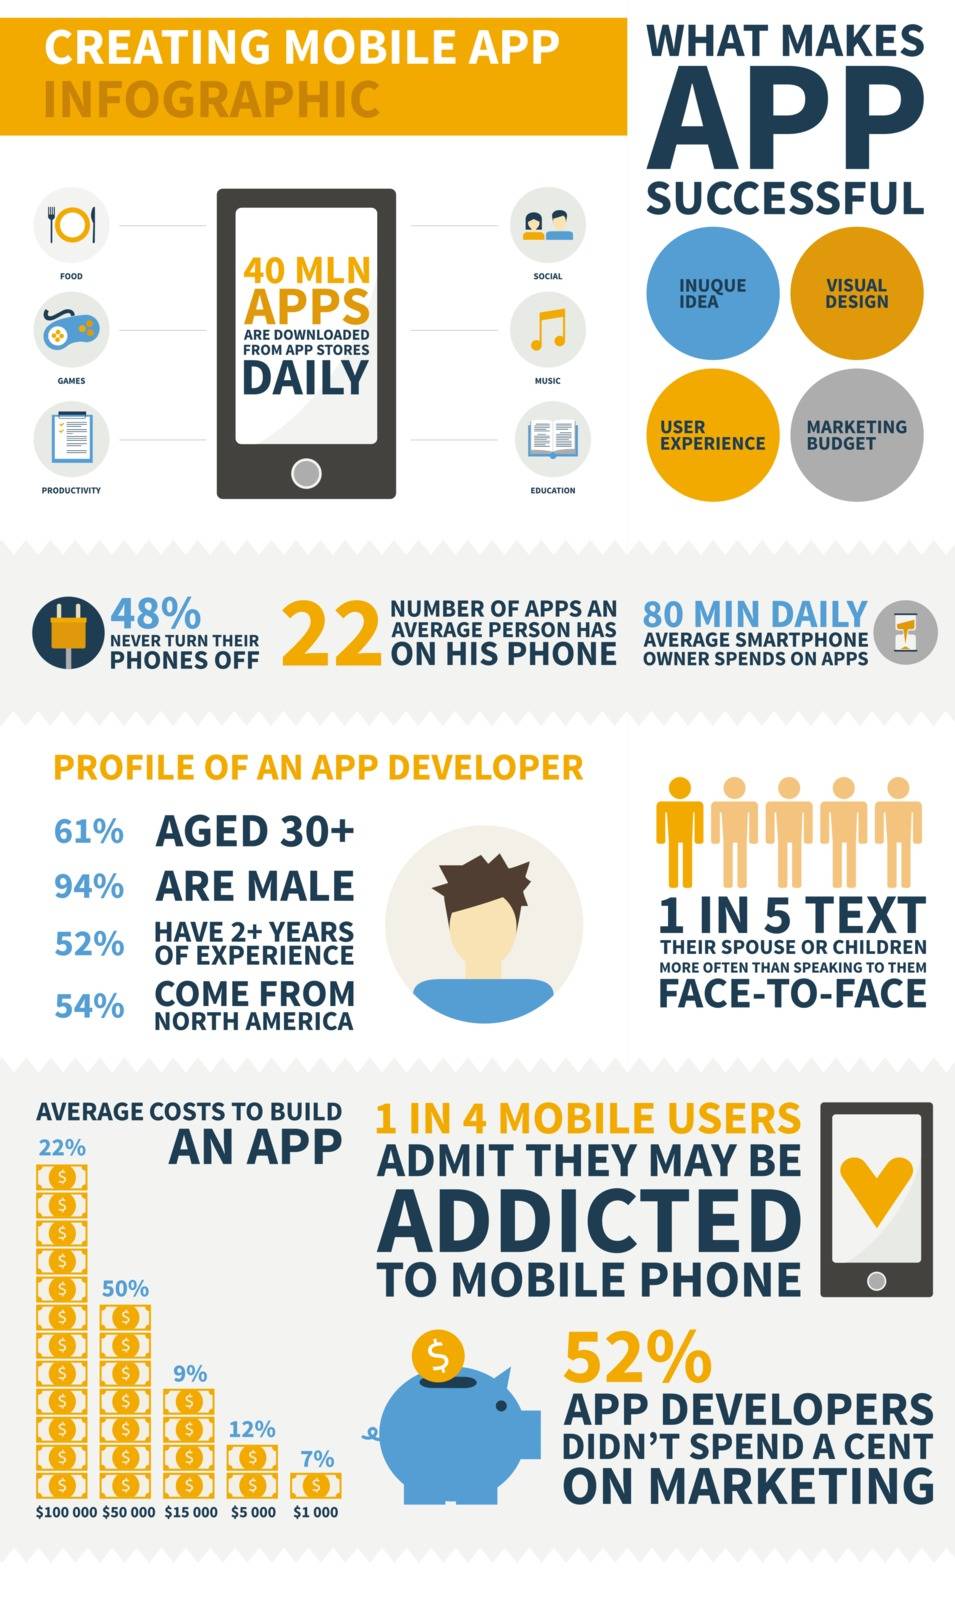 App development infographic by Favete